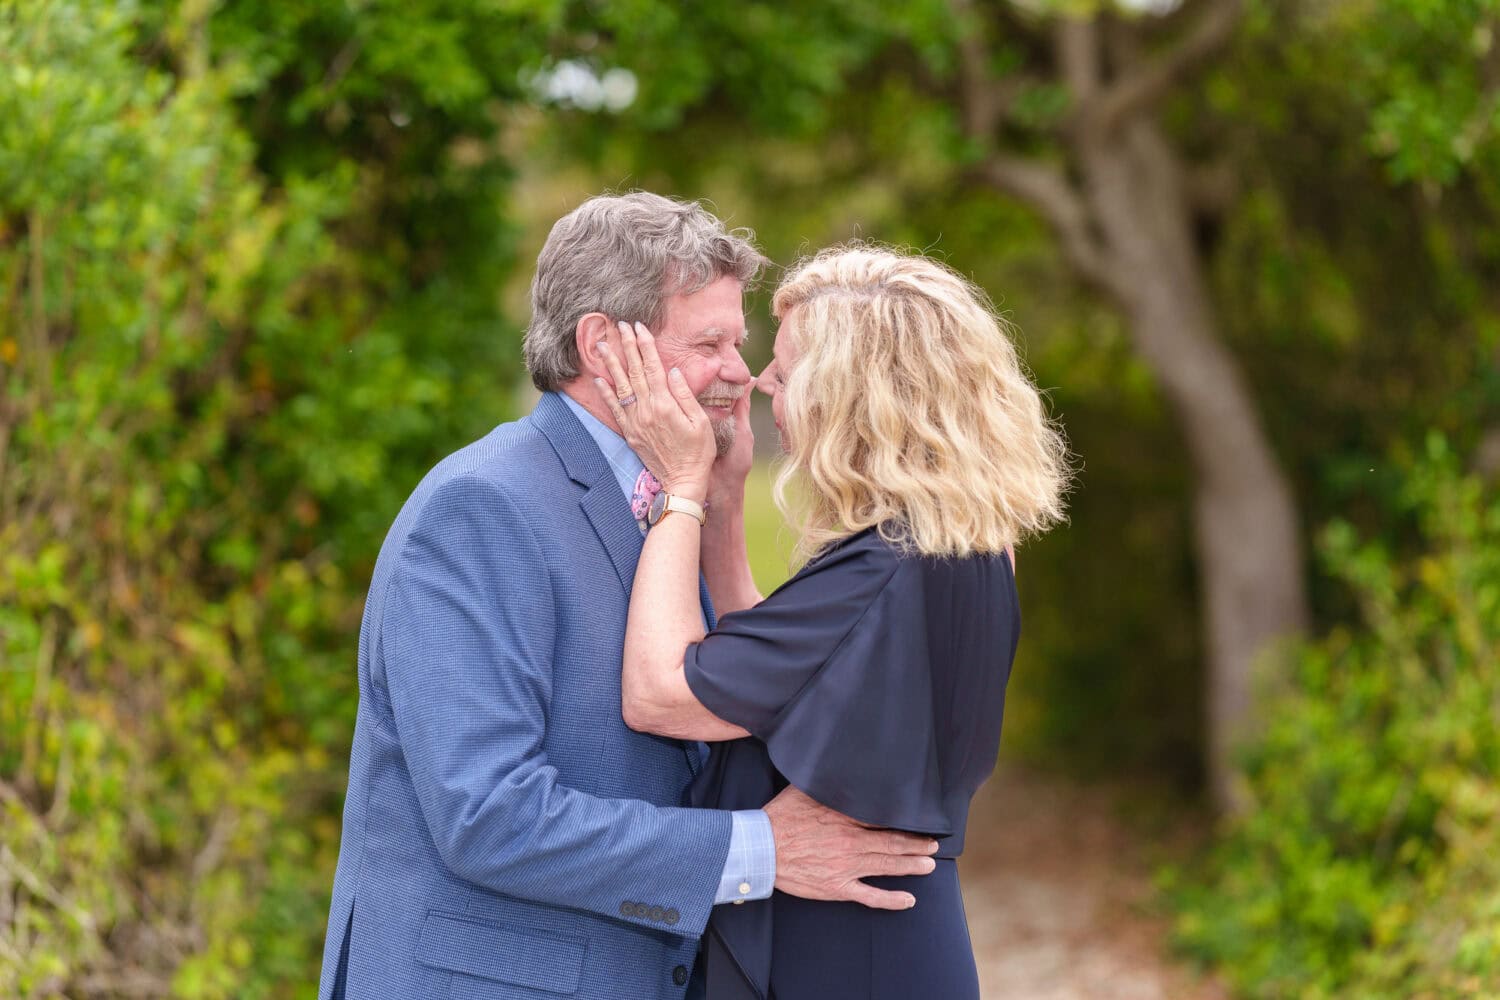 Engagement pictures for cute couple in their 70s - Huntington Beach State Park